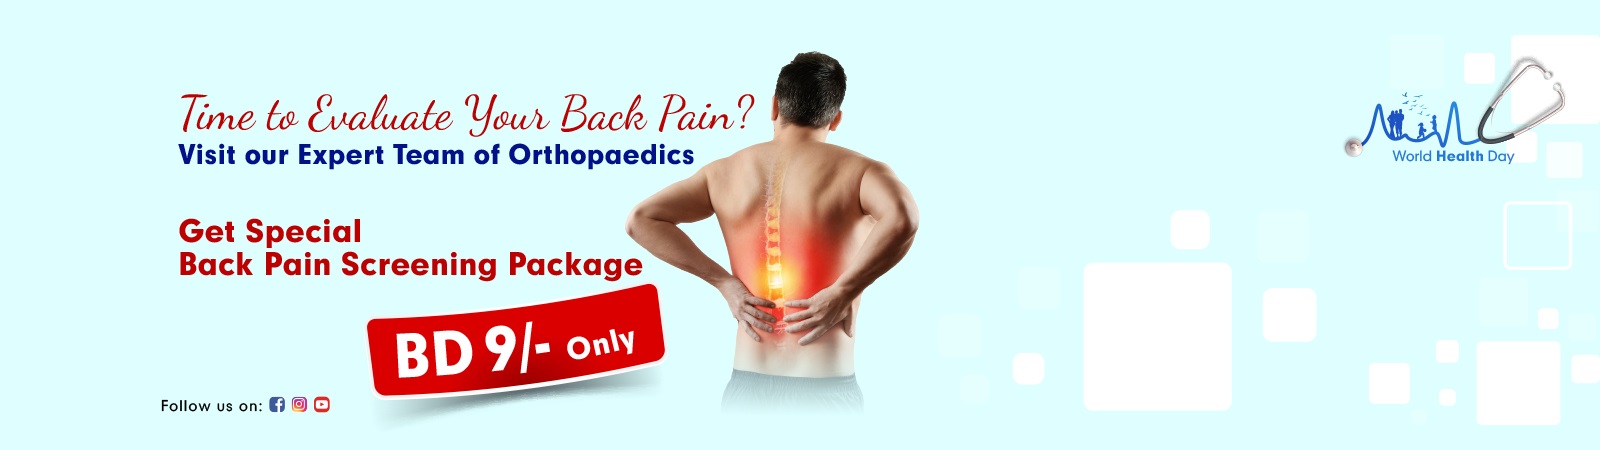 ALH-Website-Banner-Back-Pain-Package-1600-x-450_Mobile